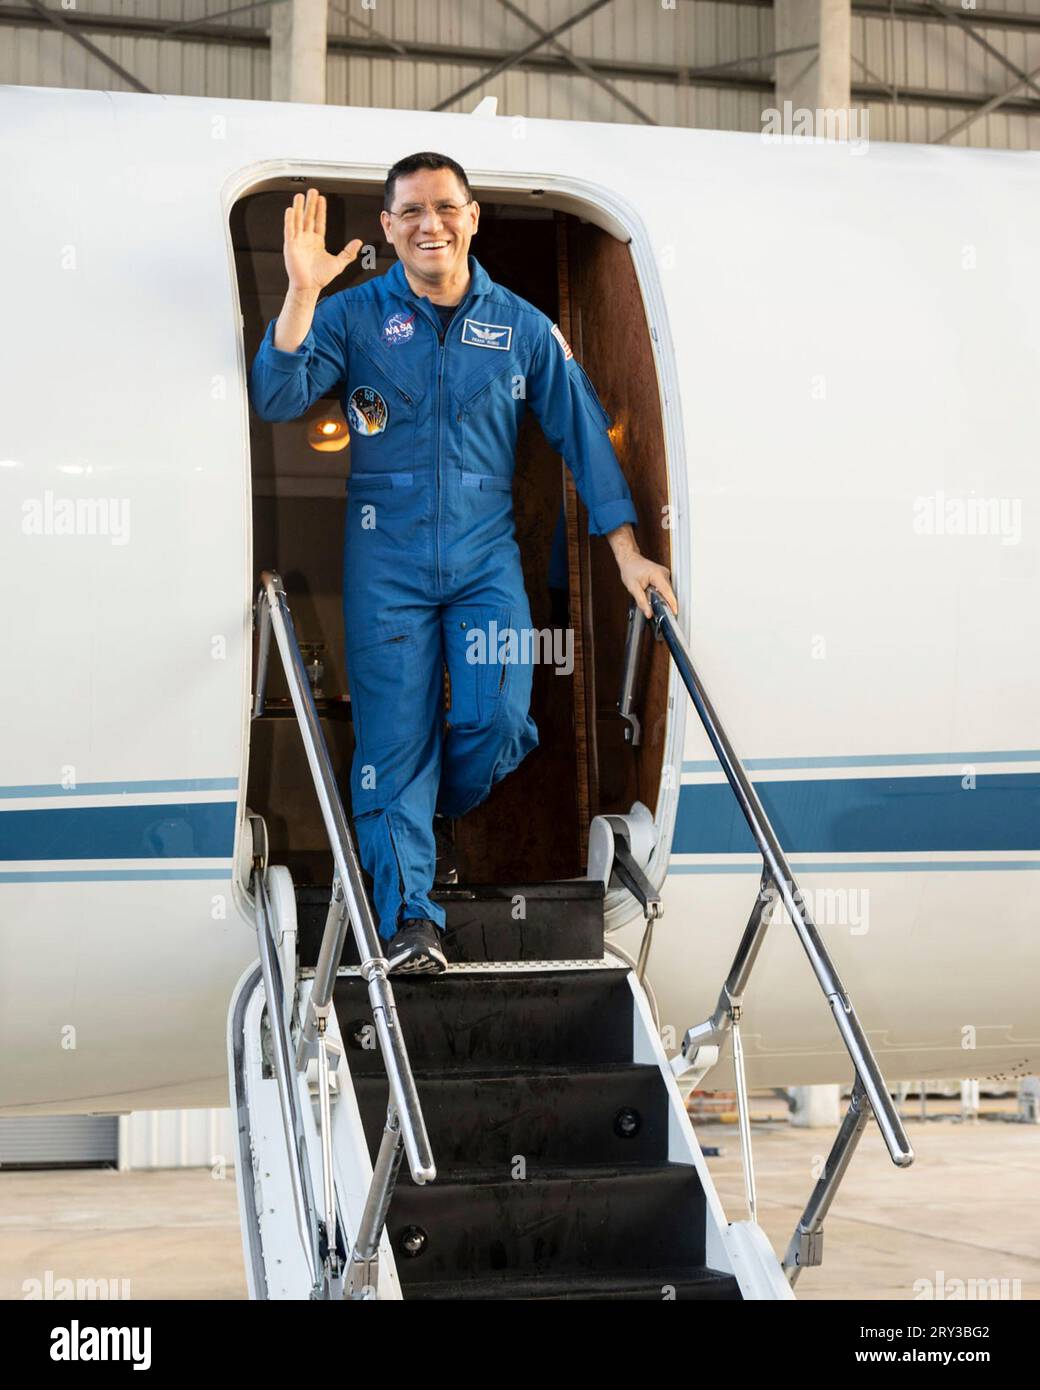 Houston, United States. 28th Sep, 2023. NASA astronaut Frank Rubio waves as he steps off an aircraft upon arriving home to the Johnson Space Center at Ellington Field, September 28, 2023 in Houston, Texas. Rubio set a new American record for the most time in space spending 371 days in space aboard the International Space Station. Credit: Robert Markowitz/NASA/Alamy Live News Stock Photo